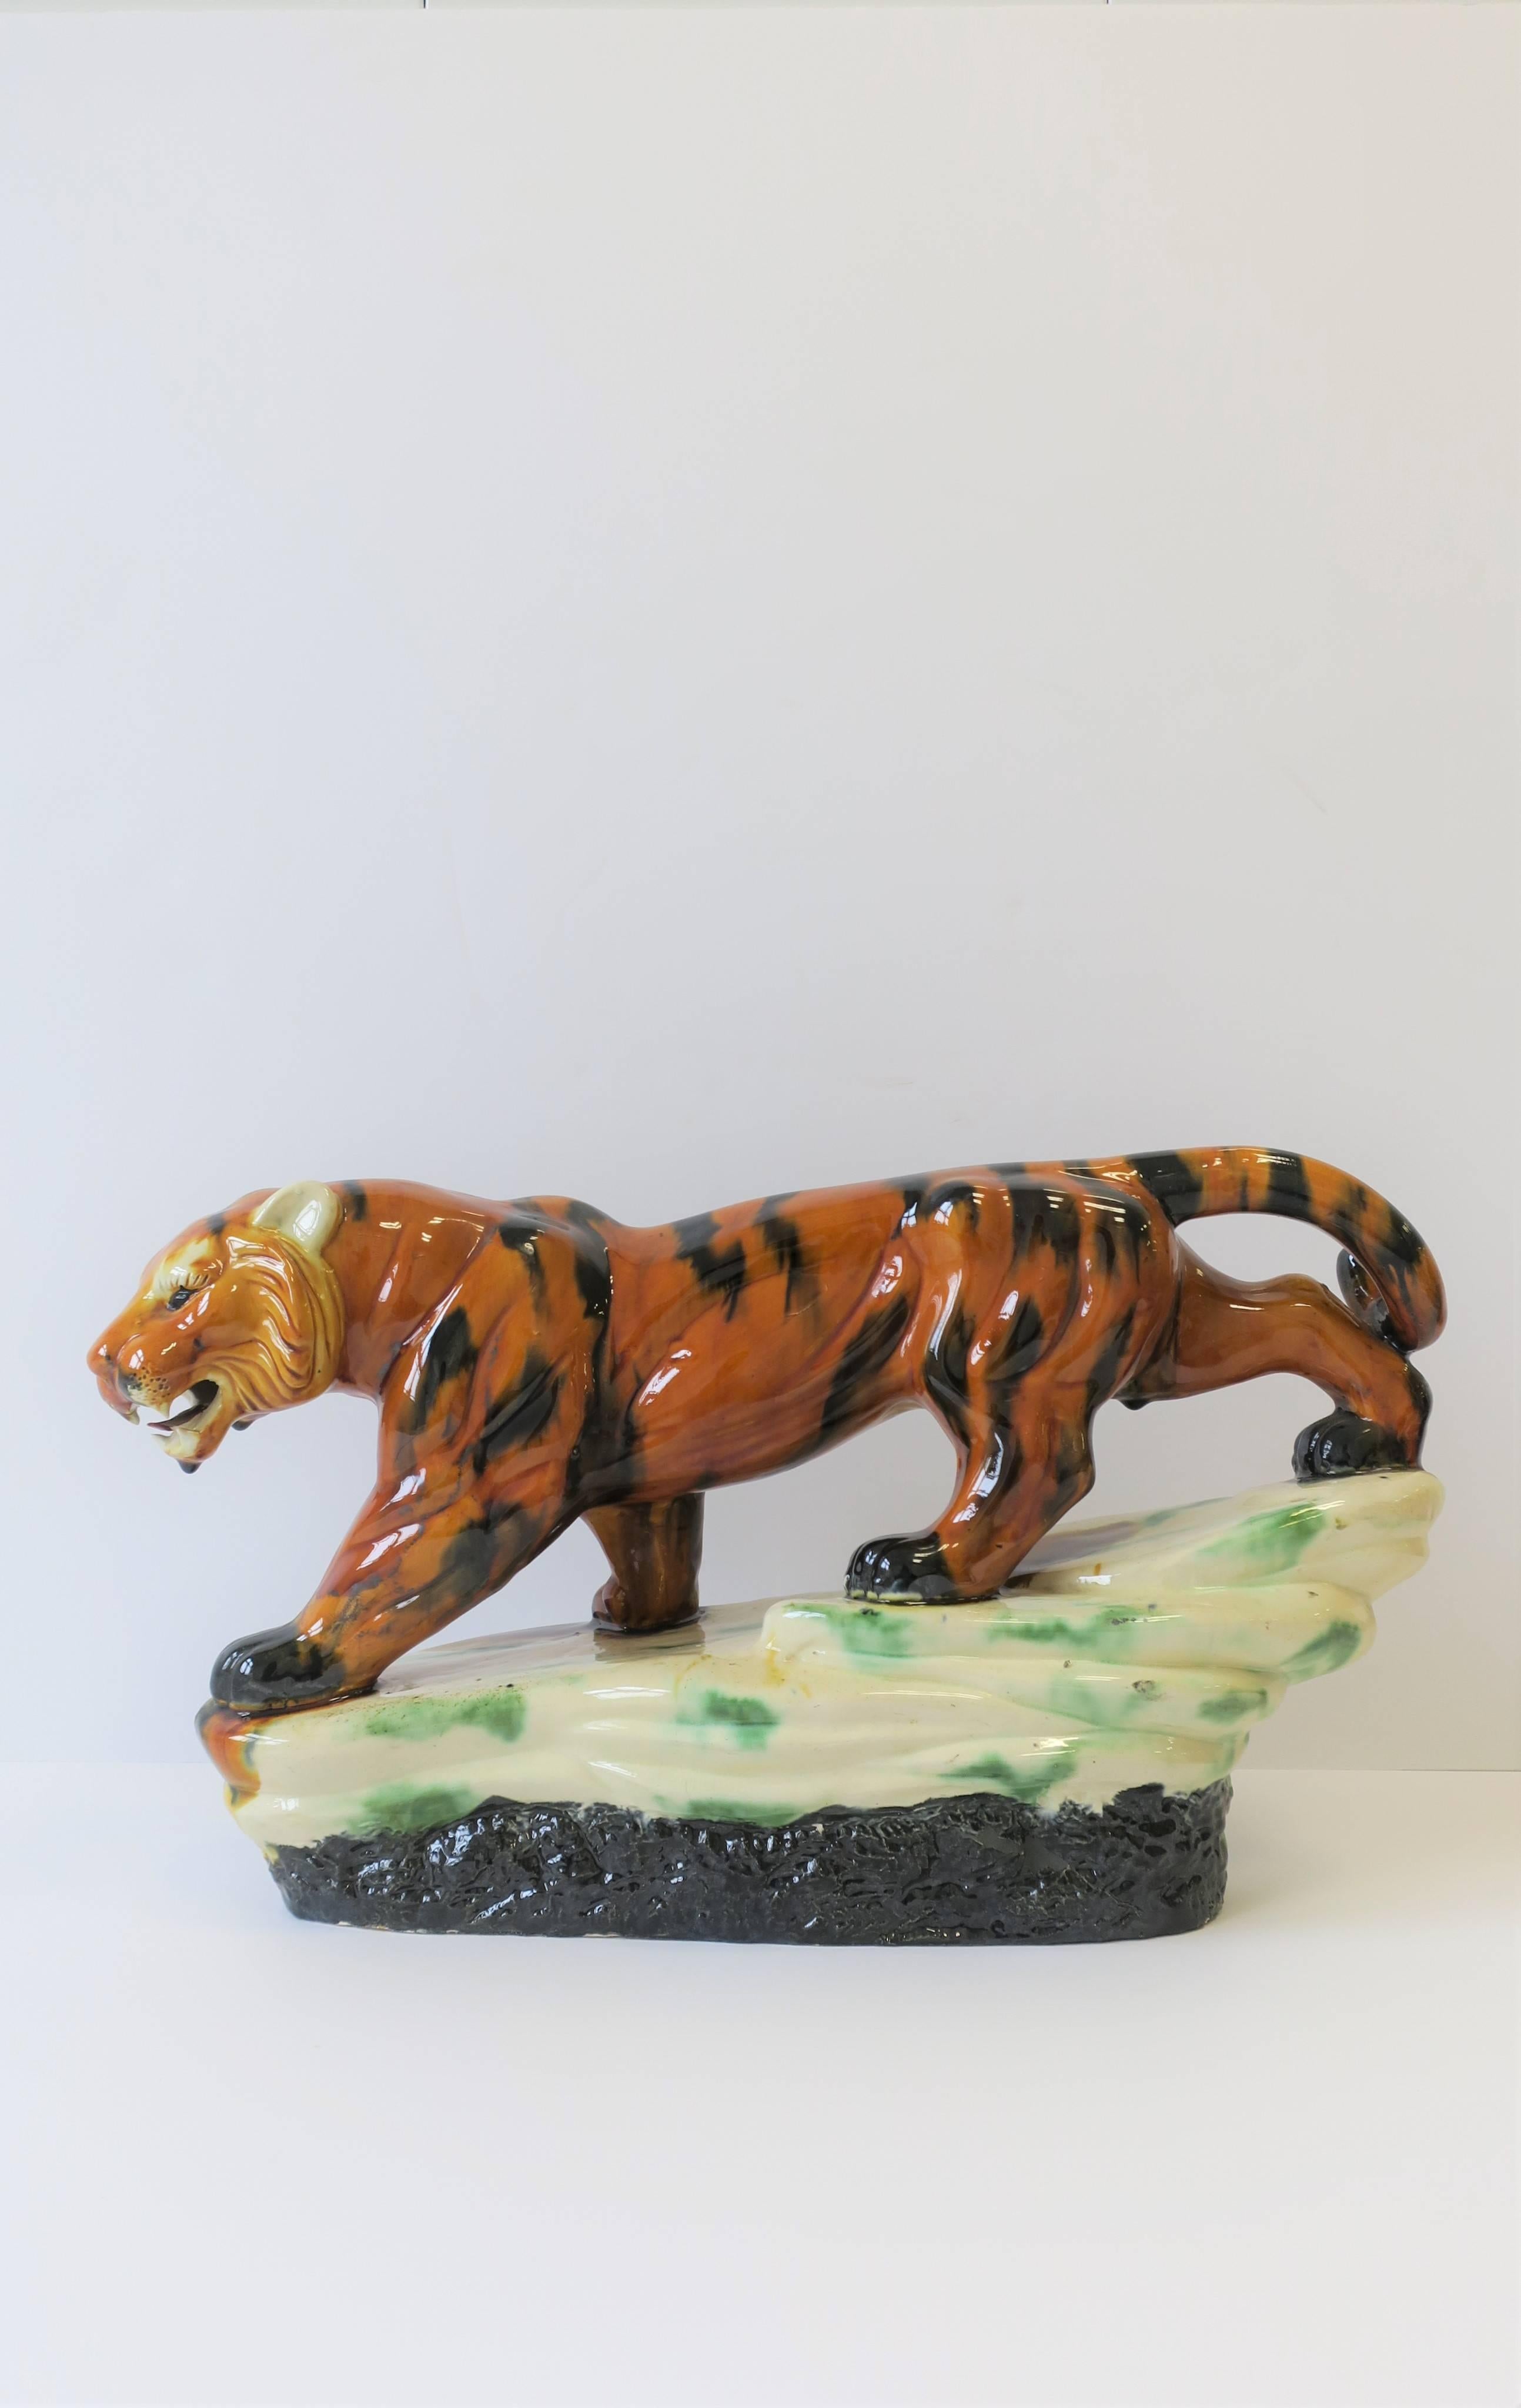 A relatively large ceramic tiger cat animal sculpture piece decorative object in the Art Deco style, circa mid to late-20th century. Beautiful detail in face, mouth, body/muscle structure and tail. Piece is made by hand as reads on bottom, shown in